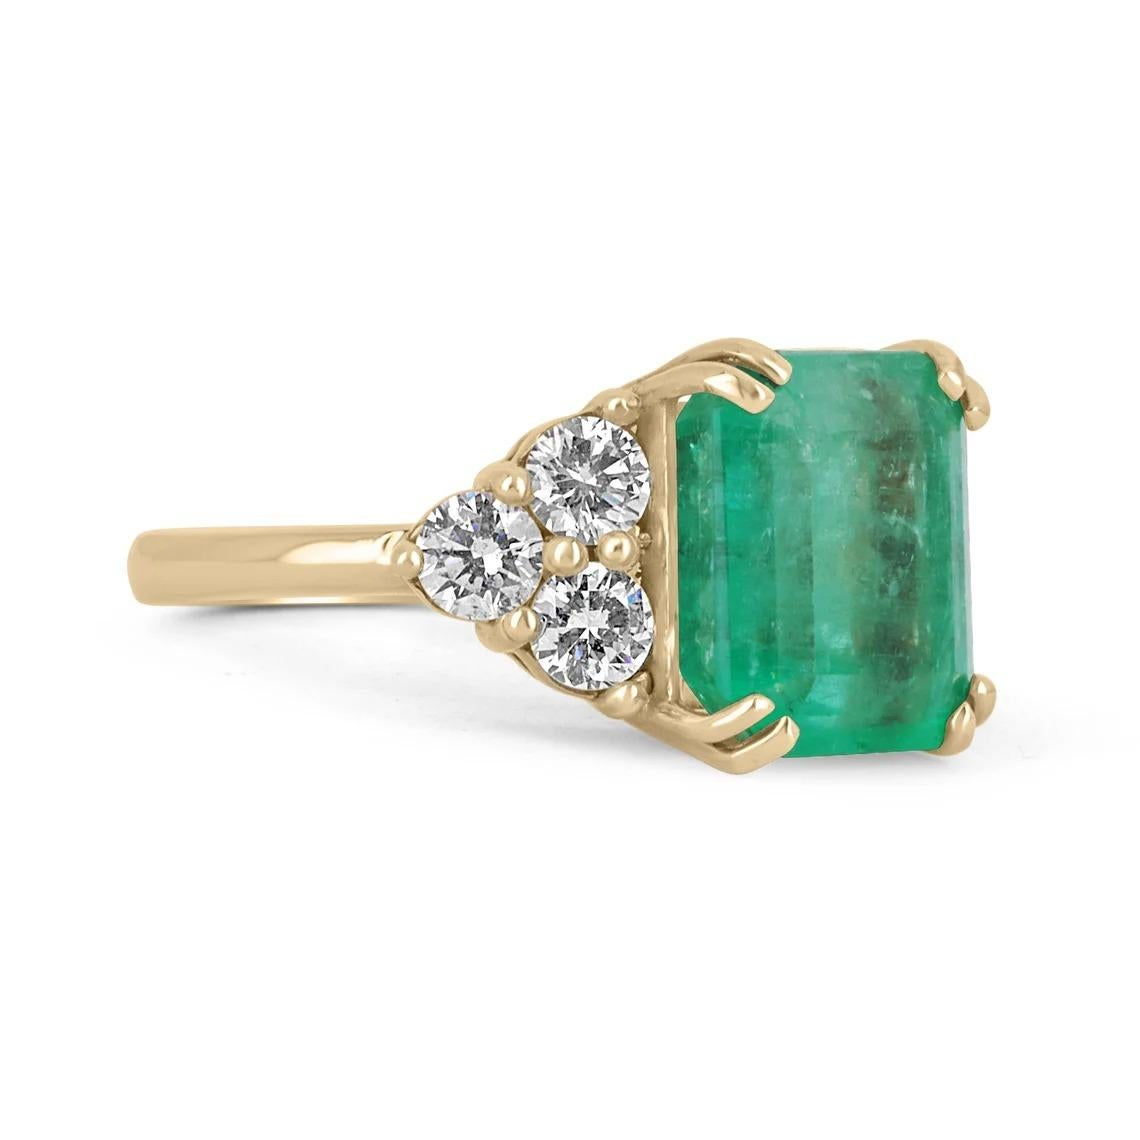 An iconic emerald and diamond engagement ring. The center stone features a large 6.68-carat emerald cut Colombian emerald with stunning qualities; a vivacious medium green color, very good eye clarity and luster, as well as very minimal inclusions